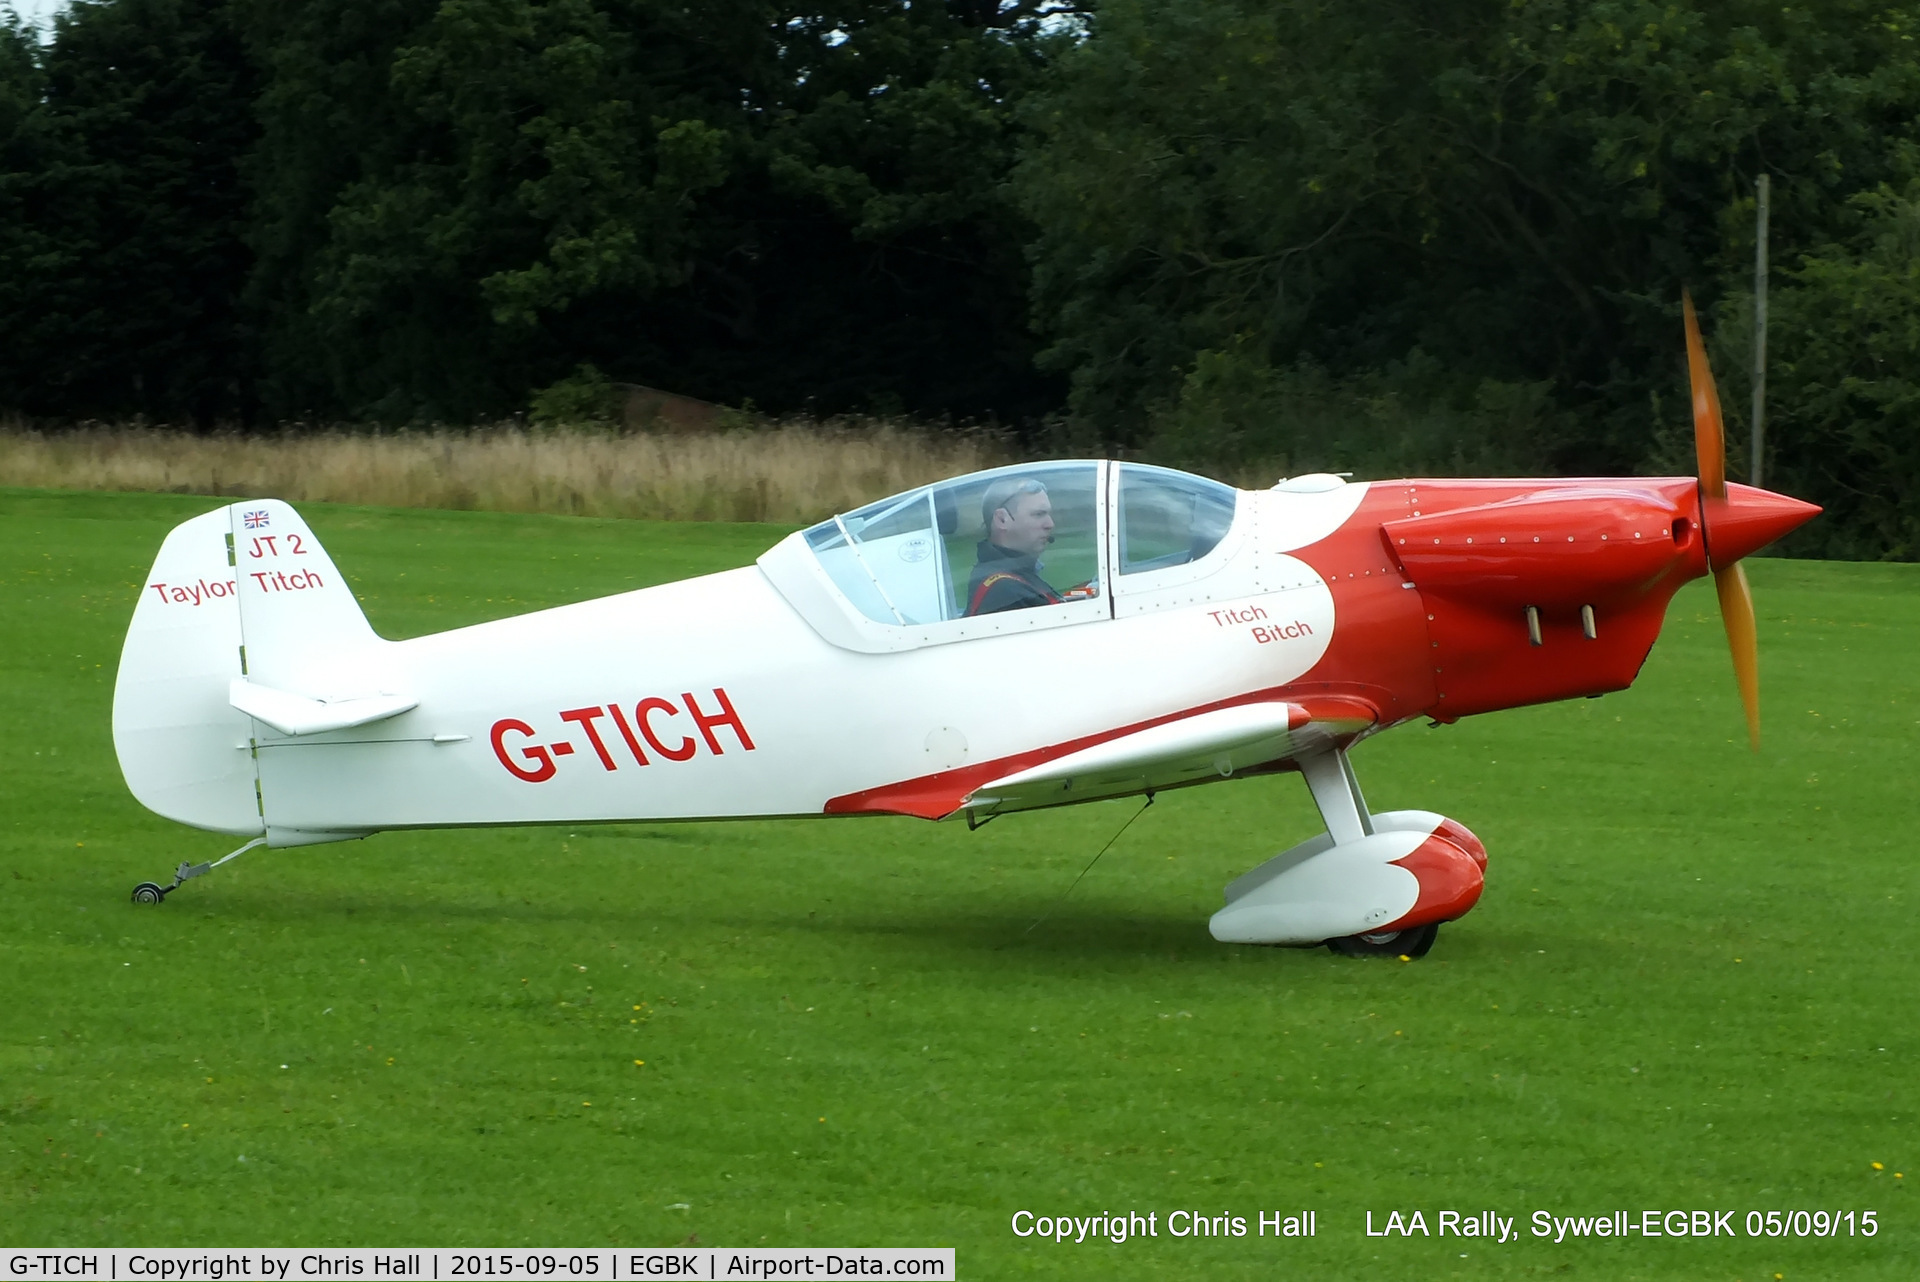 G-TICH, 2001 Taylor JT-2 Titch C/N PFA 060-3213, at the LAA Rally 2015, Sywell